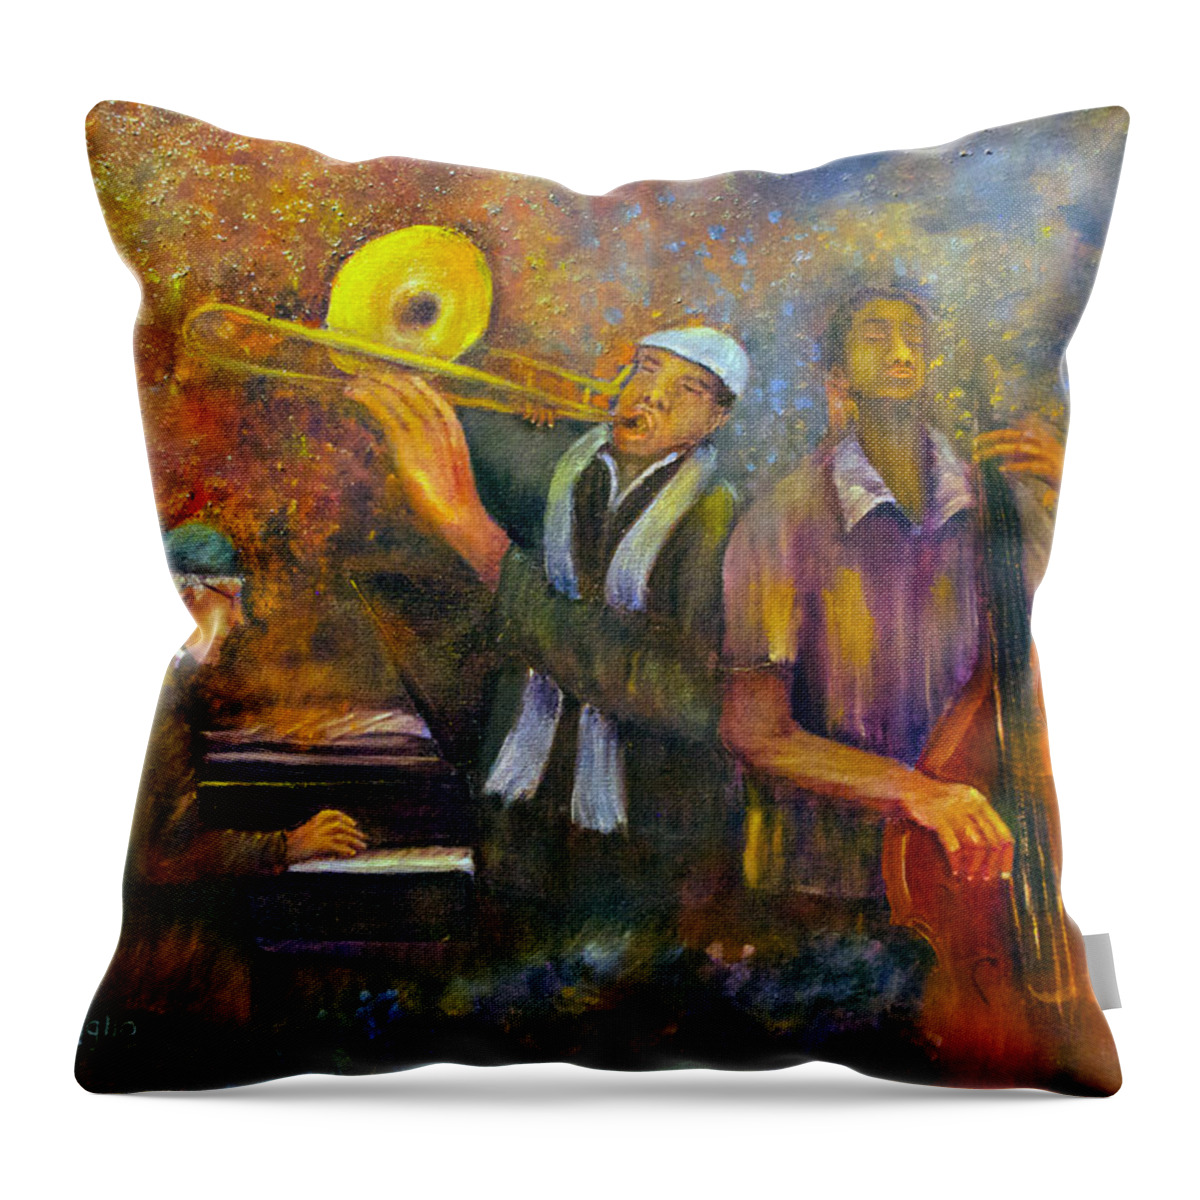 Music Throw Pillow featuring the painting All That Jazz by Loretta Luglio